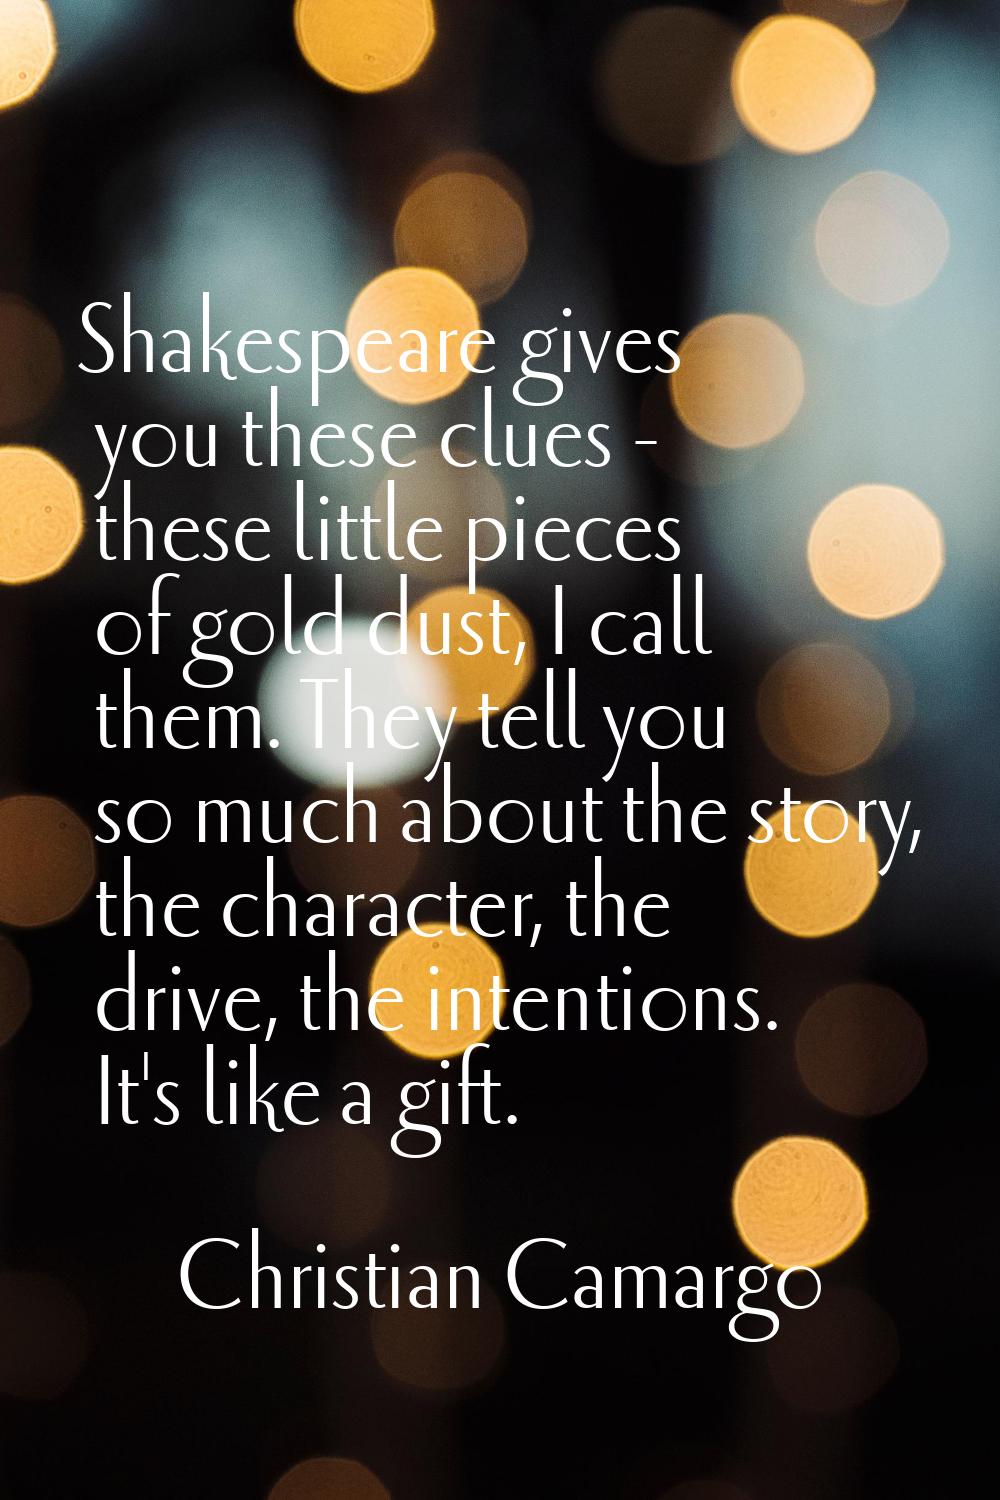 Shakespeare gives you these clues - these little pieces of gold dust, I call them. They tell you so